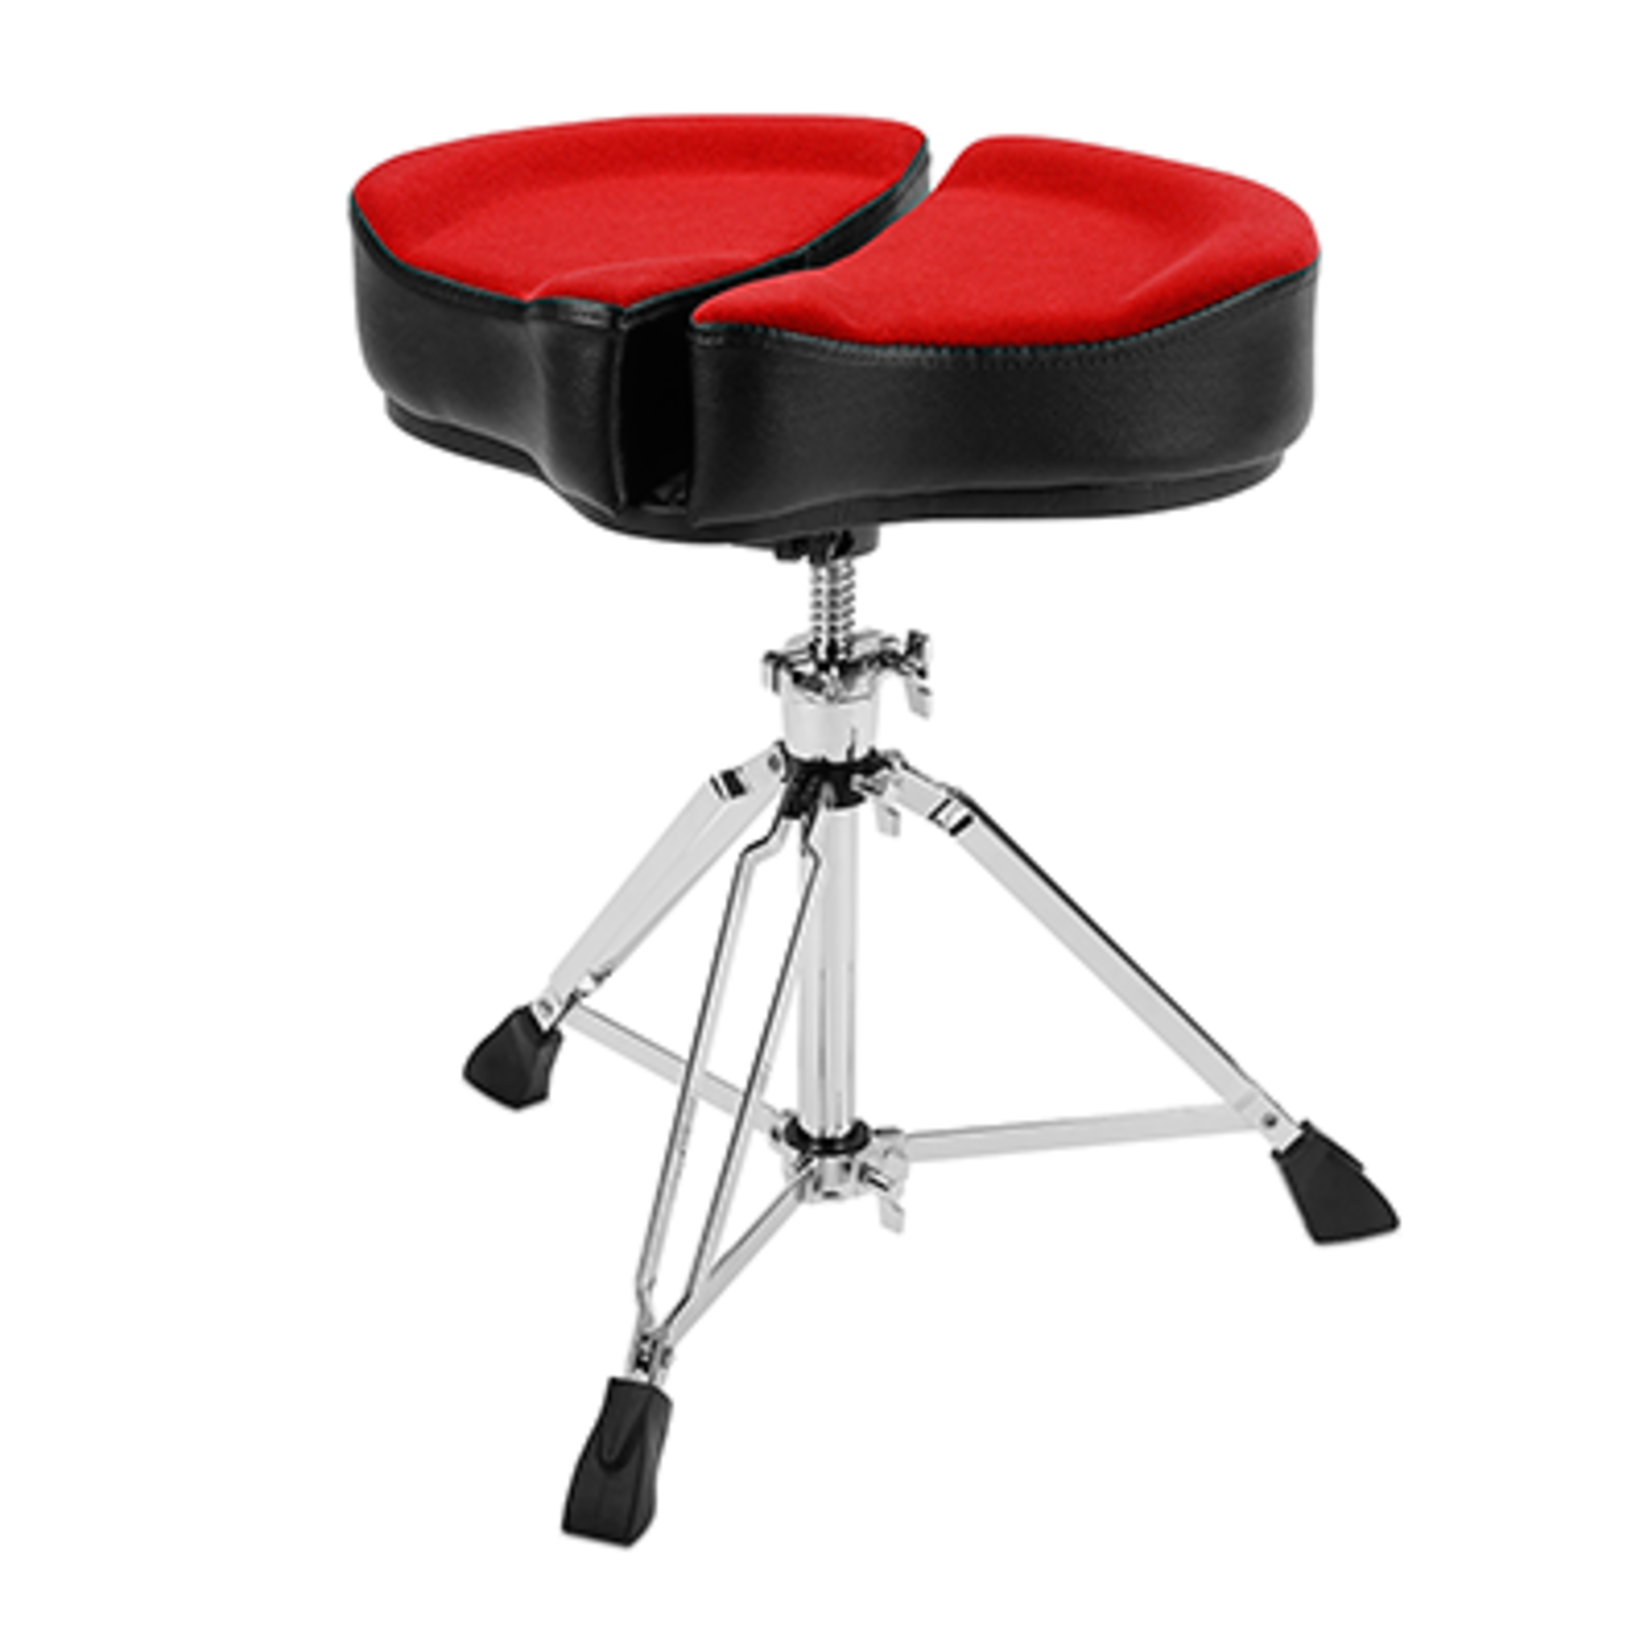 Ahead Ahead SPG-R3 18Ahead SPG-R3 18" Spinal G Saddle Red Cloth Top/Black Sides, 3 Leg Base" Spinal G Saddle Red Cloth Top/Black Sides, 3 Leg Base, 18" to 24" Adjustment Height